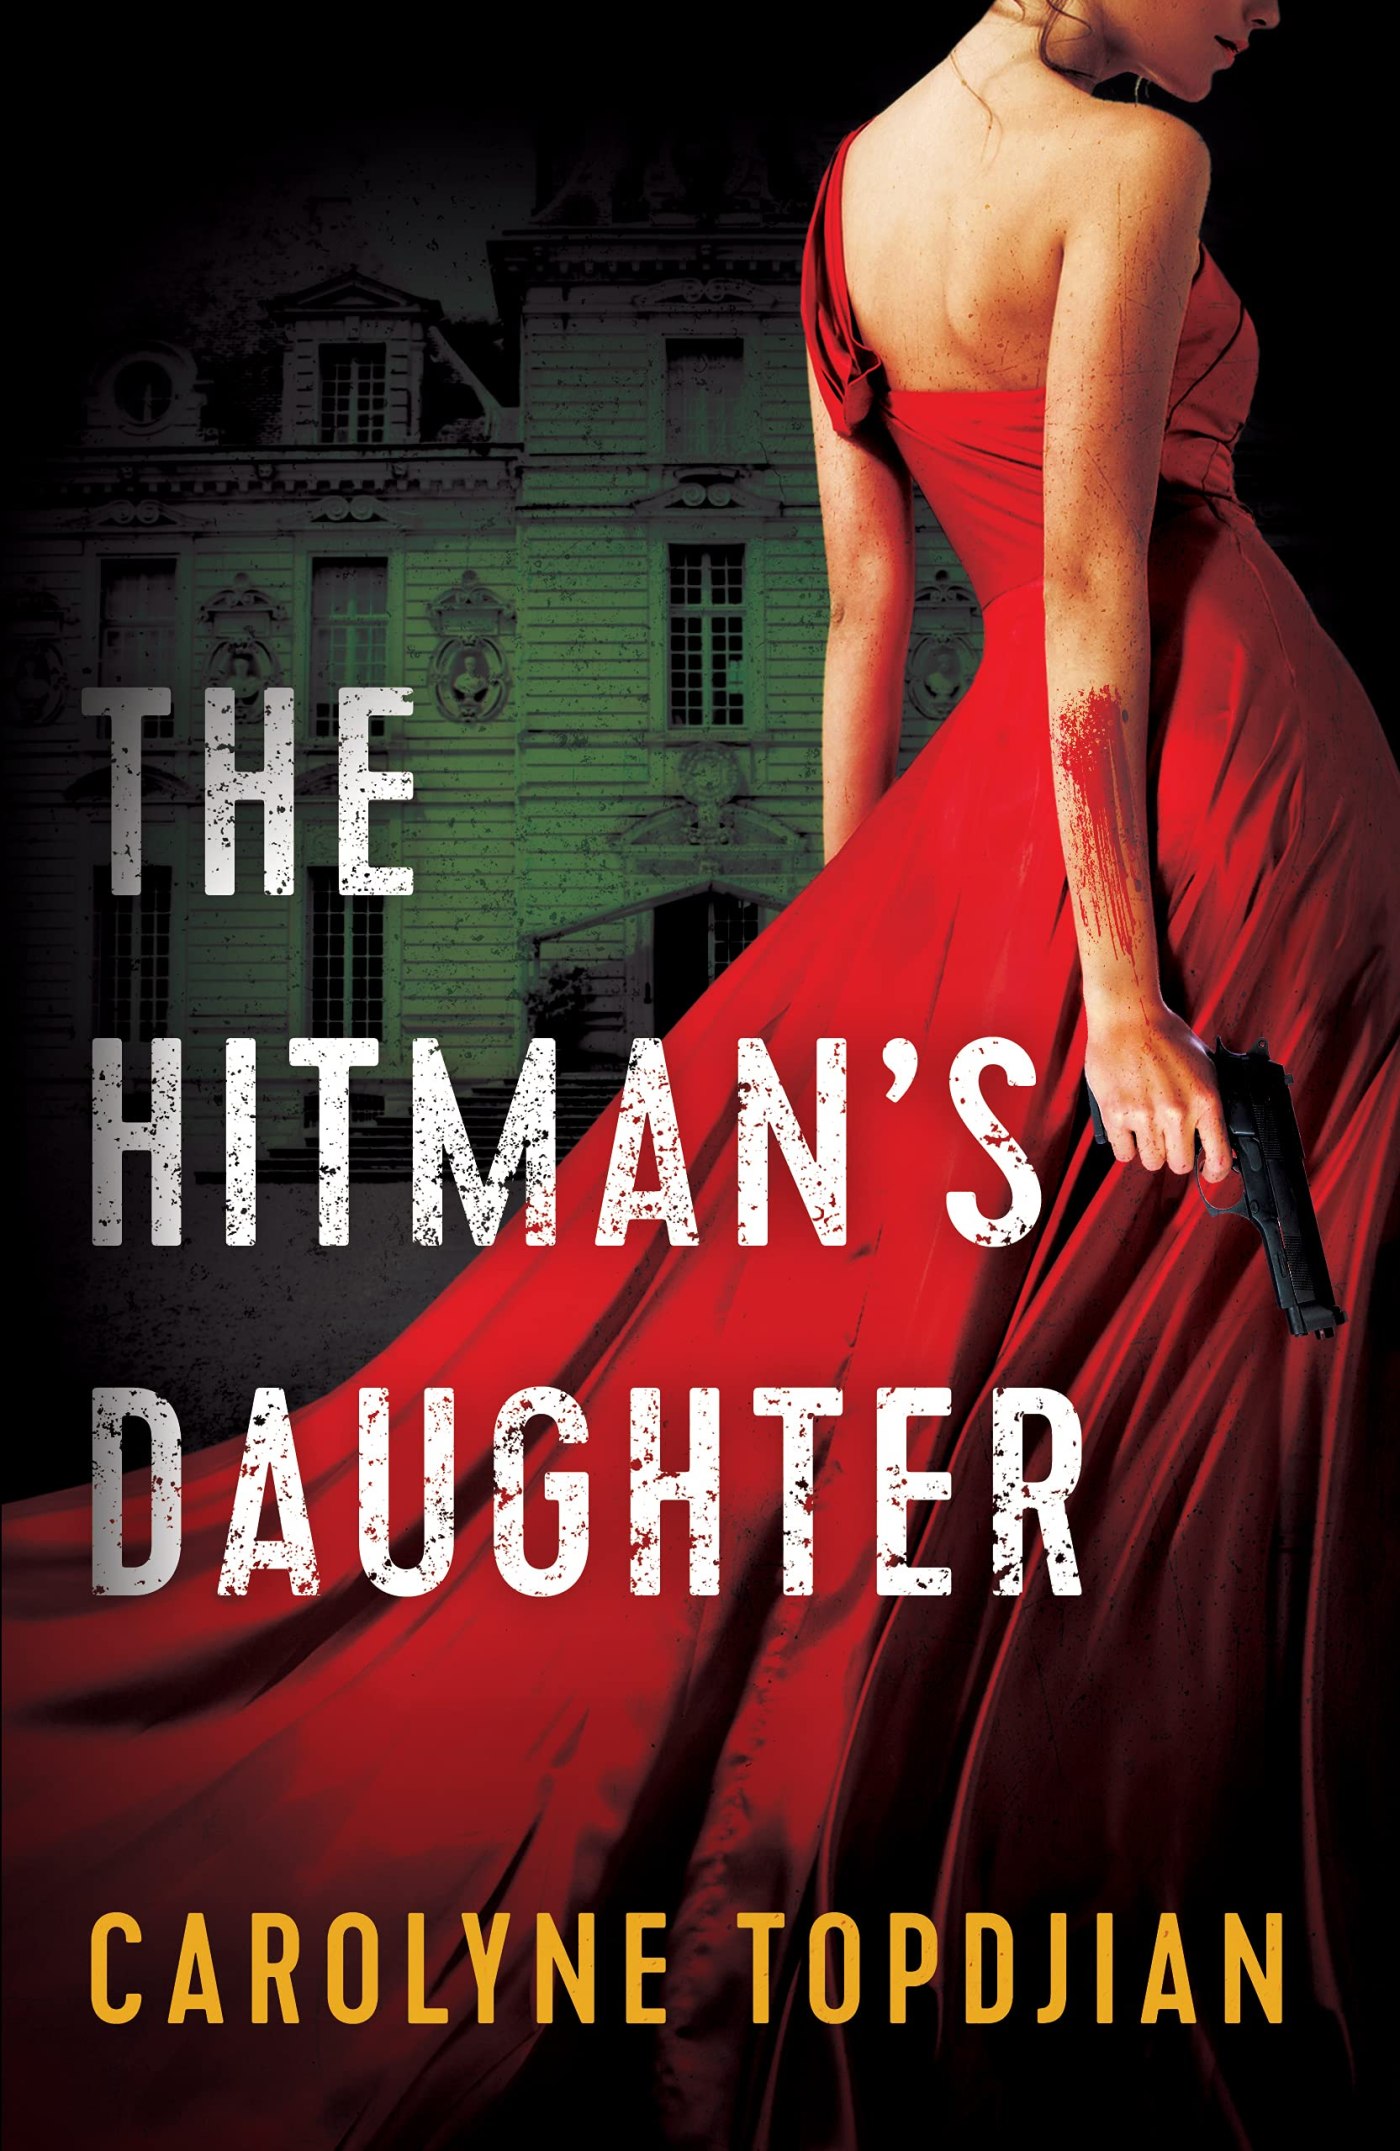 Front cover image of the Hitman's Daughter with a half of a face of a woman in a red, flowing dress, with blood on her arms, holding a gun in front of a rundown hotel